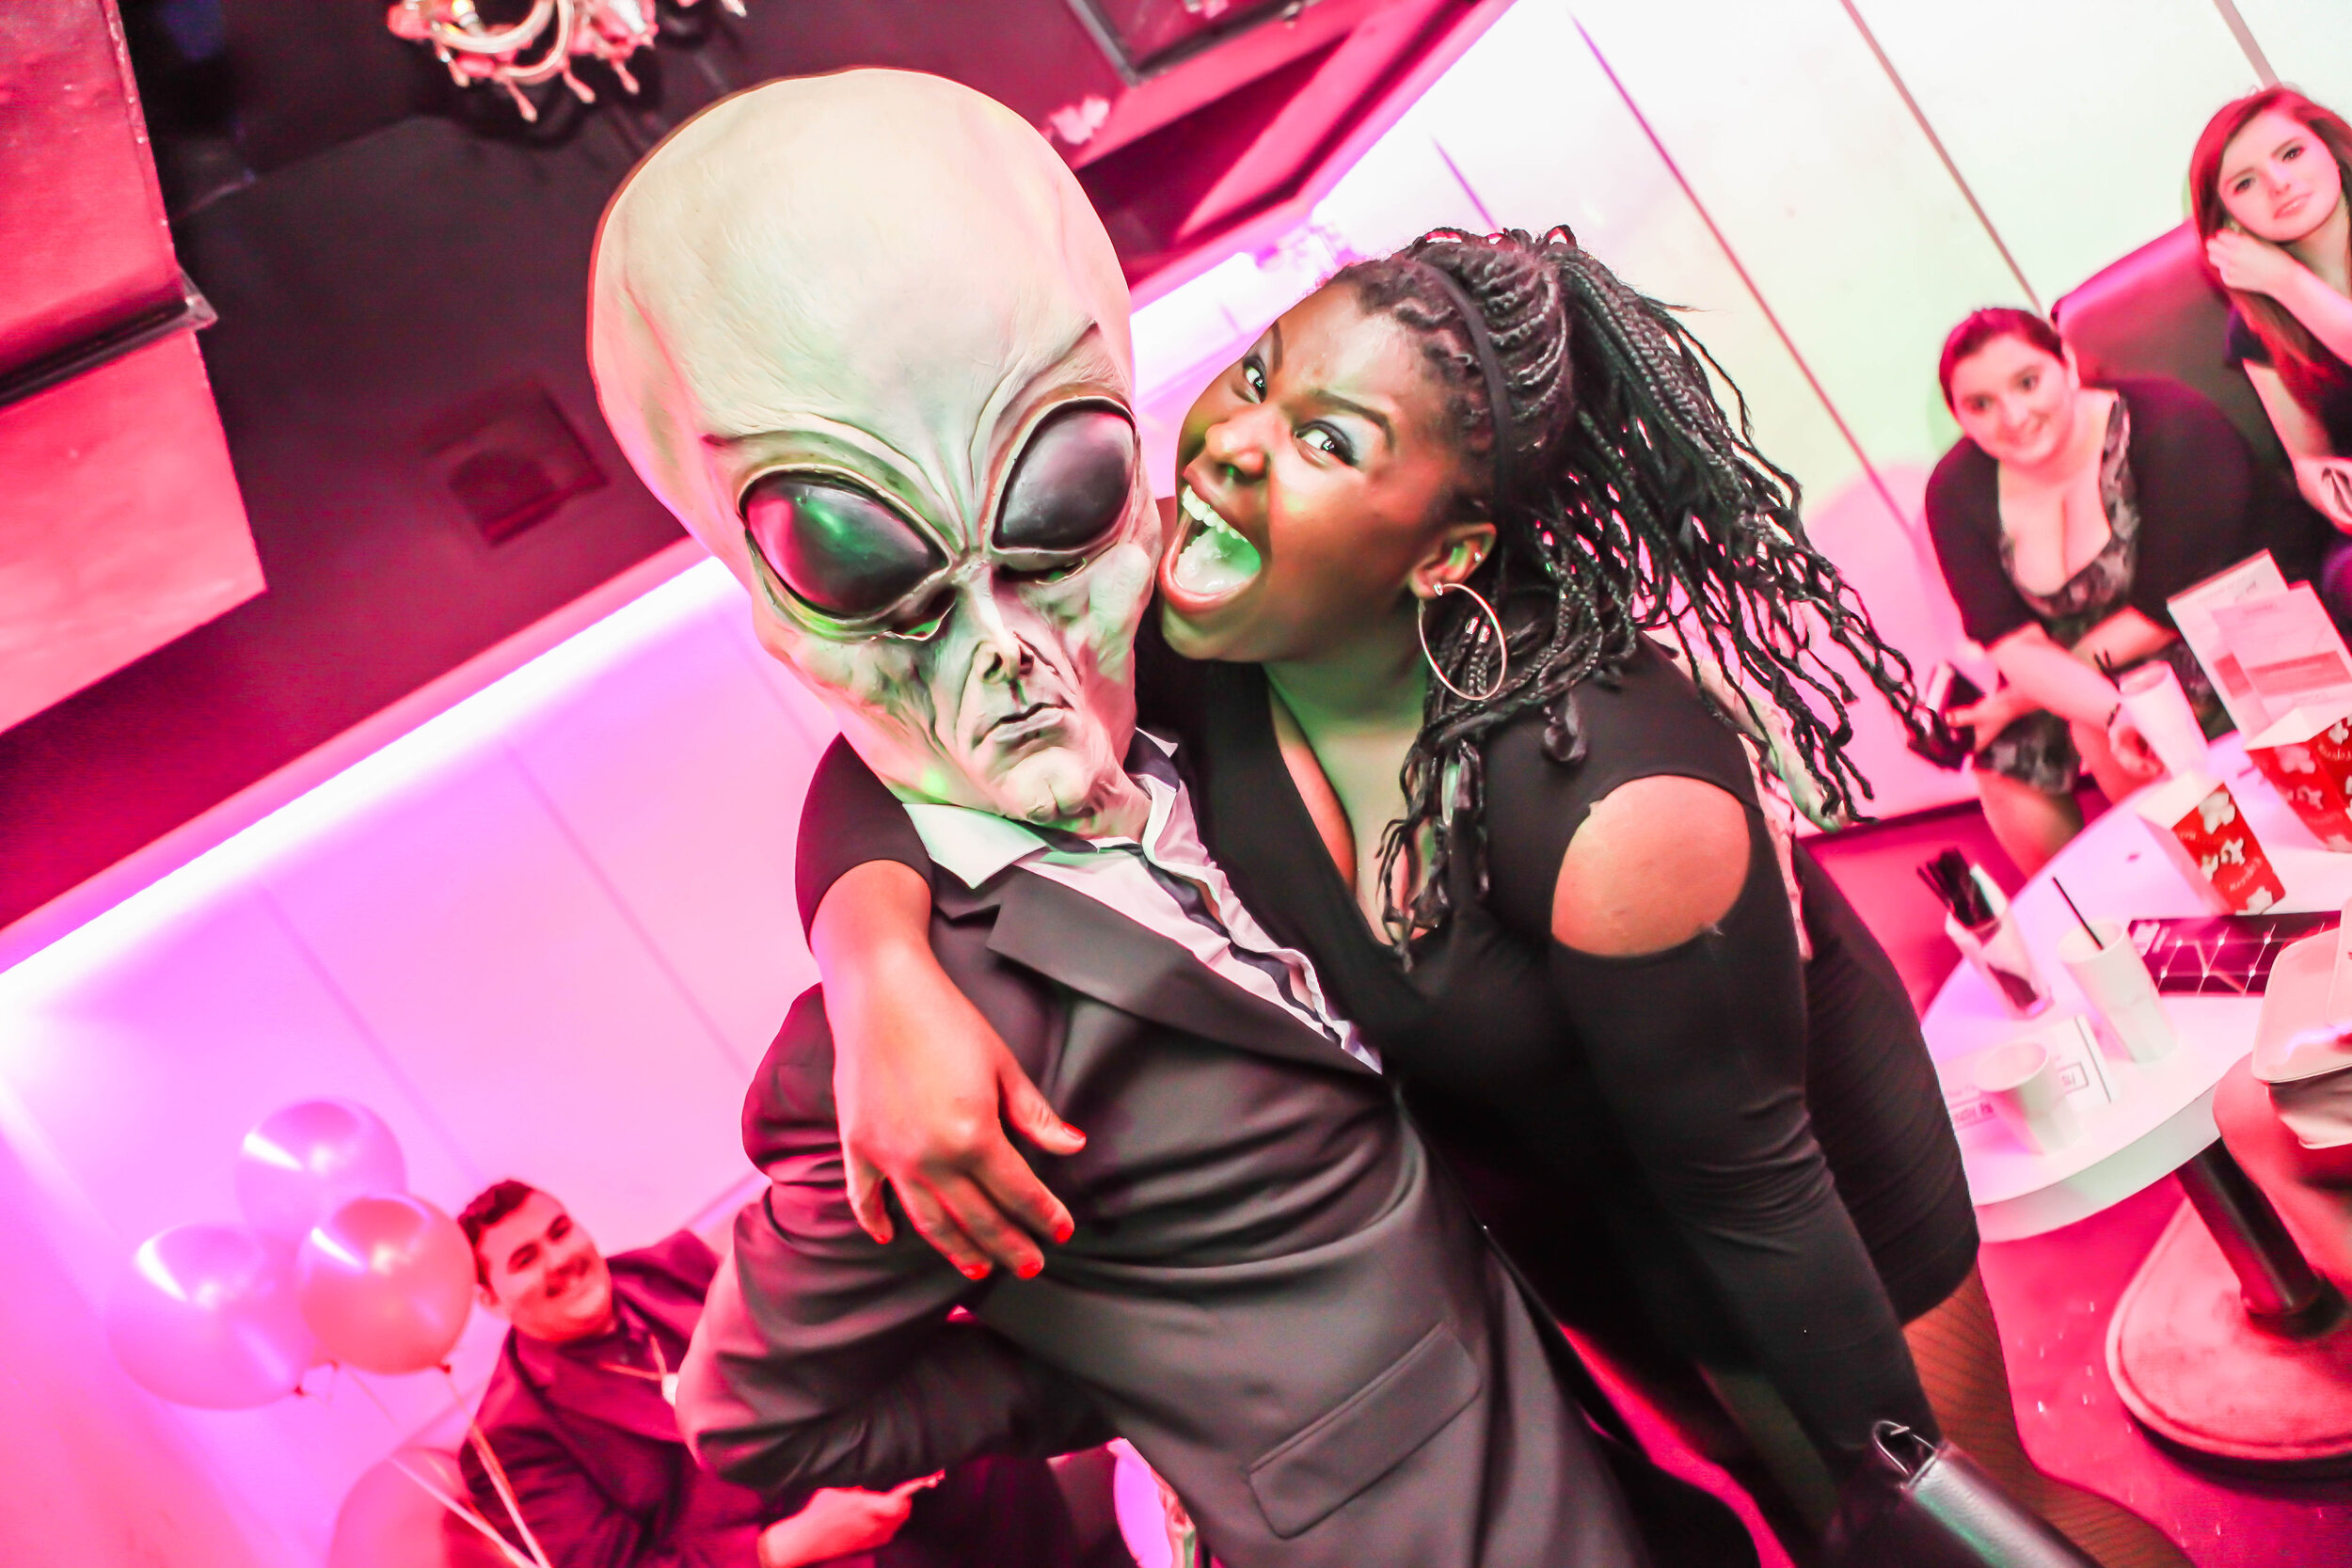 Alien walkabout character at event 